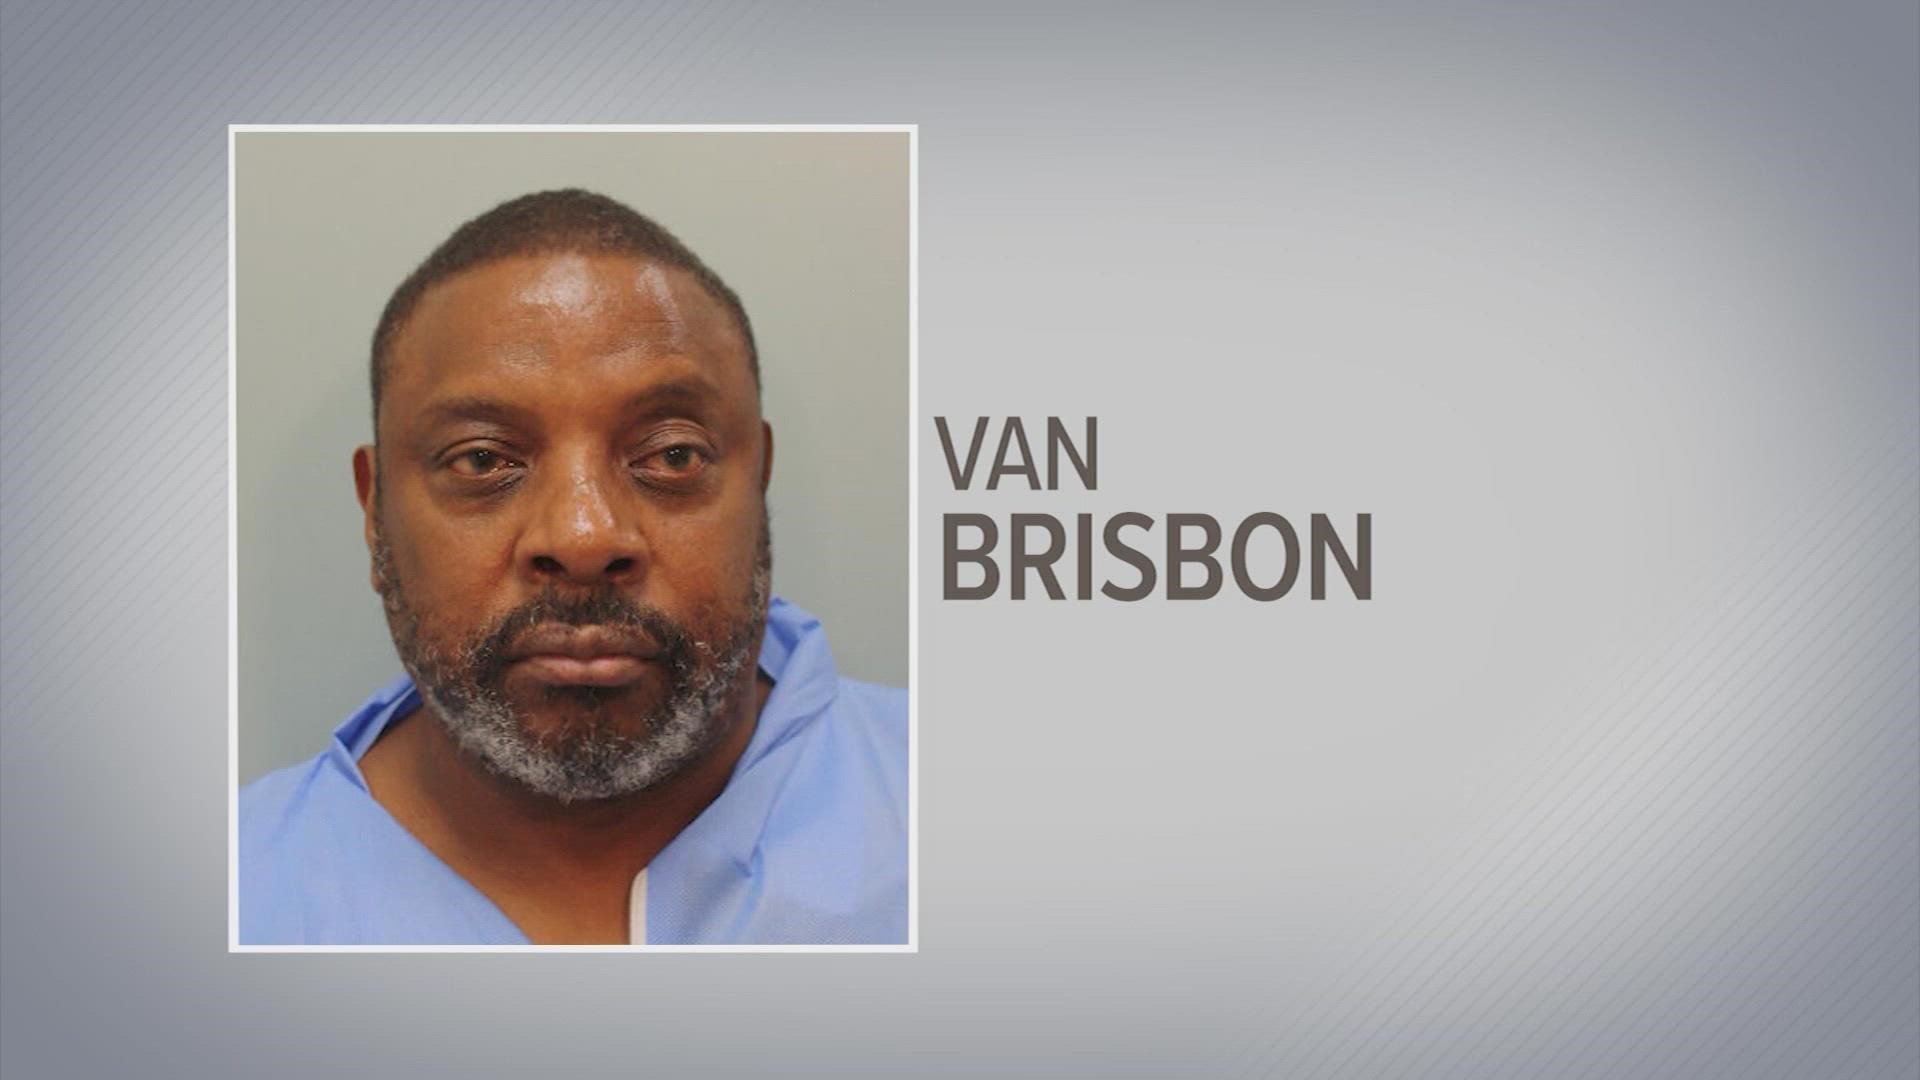 Van Brisbon, 60, is charged with murder in the death of 16-year-old Lauren Juma, a sophomore at Nimitz High School.